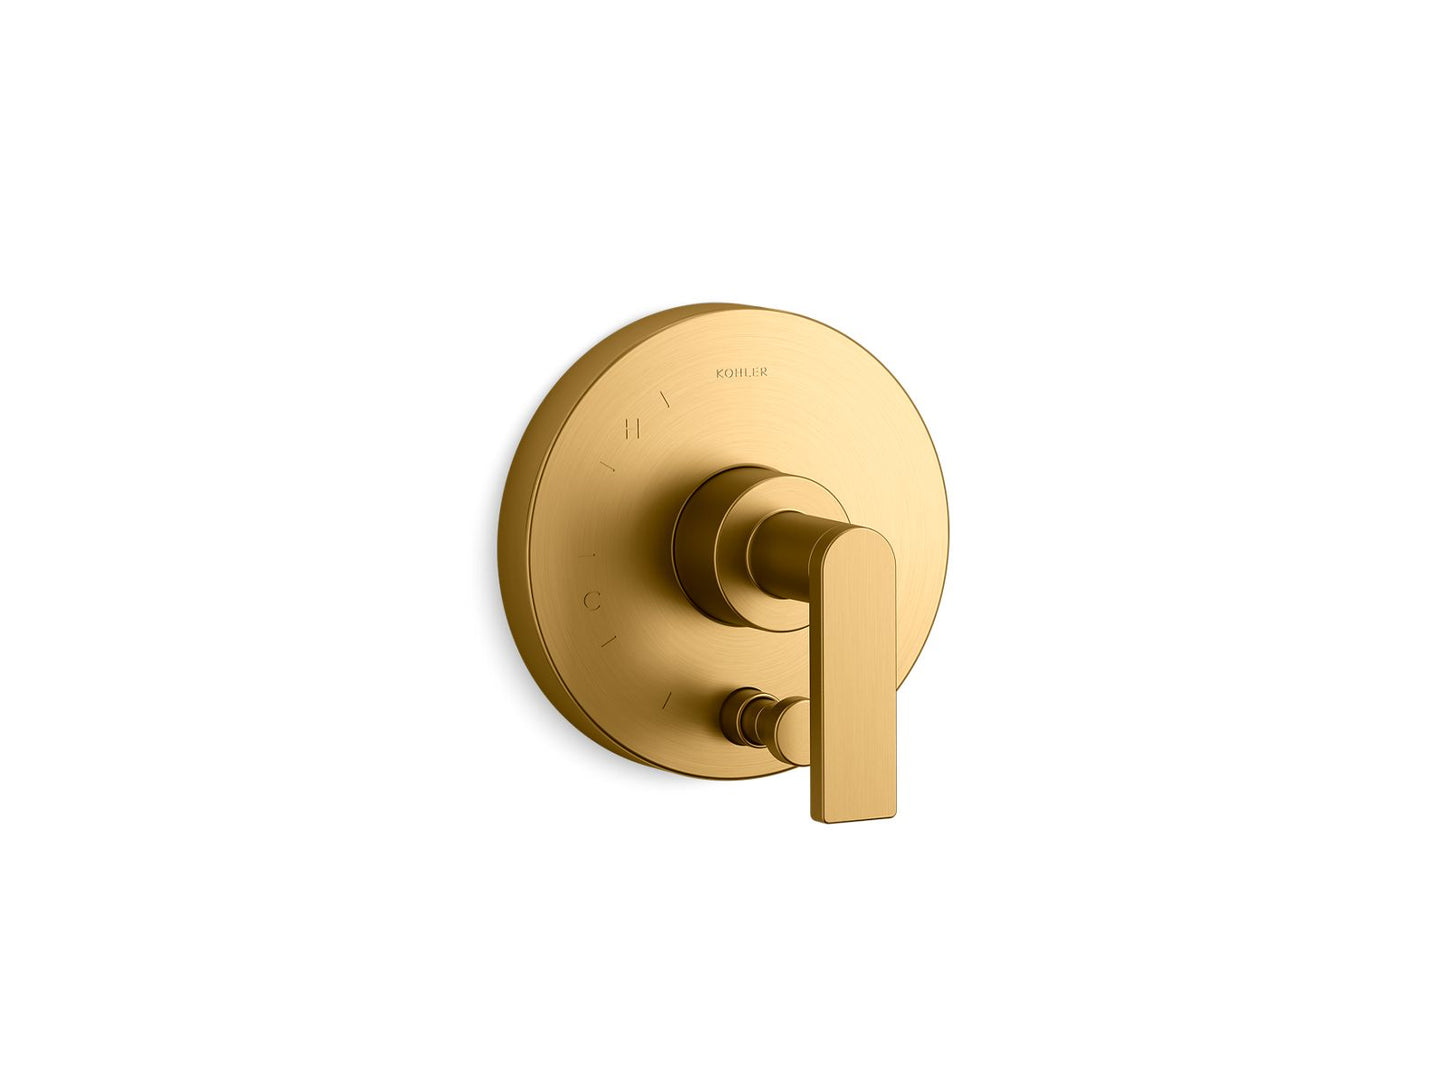 KOHLER K-T73117-4-2MB Composed Rite-Temp Valve Trim With Push-Button Diverter And Lever Handle In Vibrant Brushed Moderne Brass